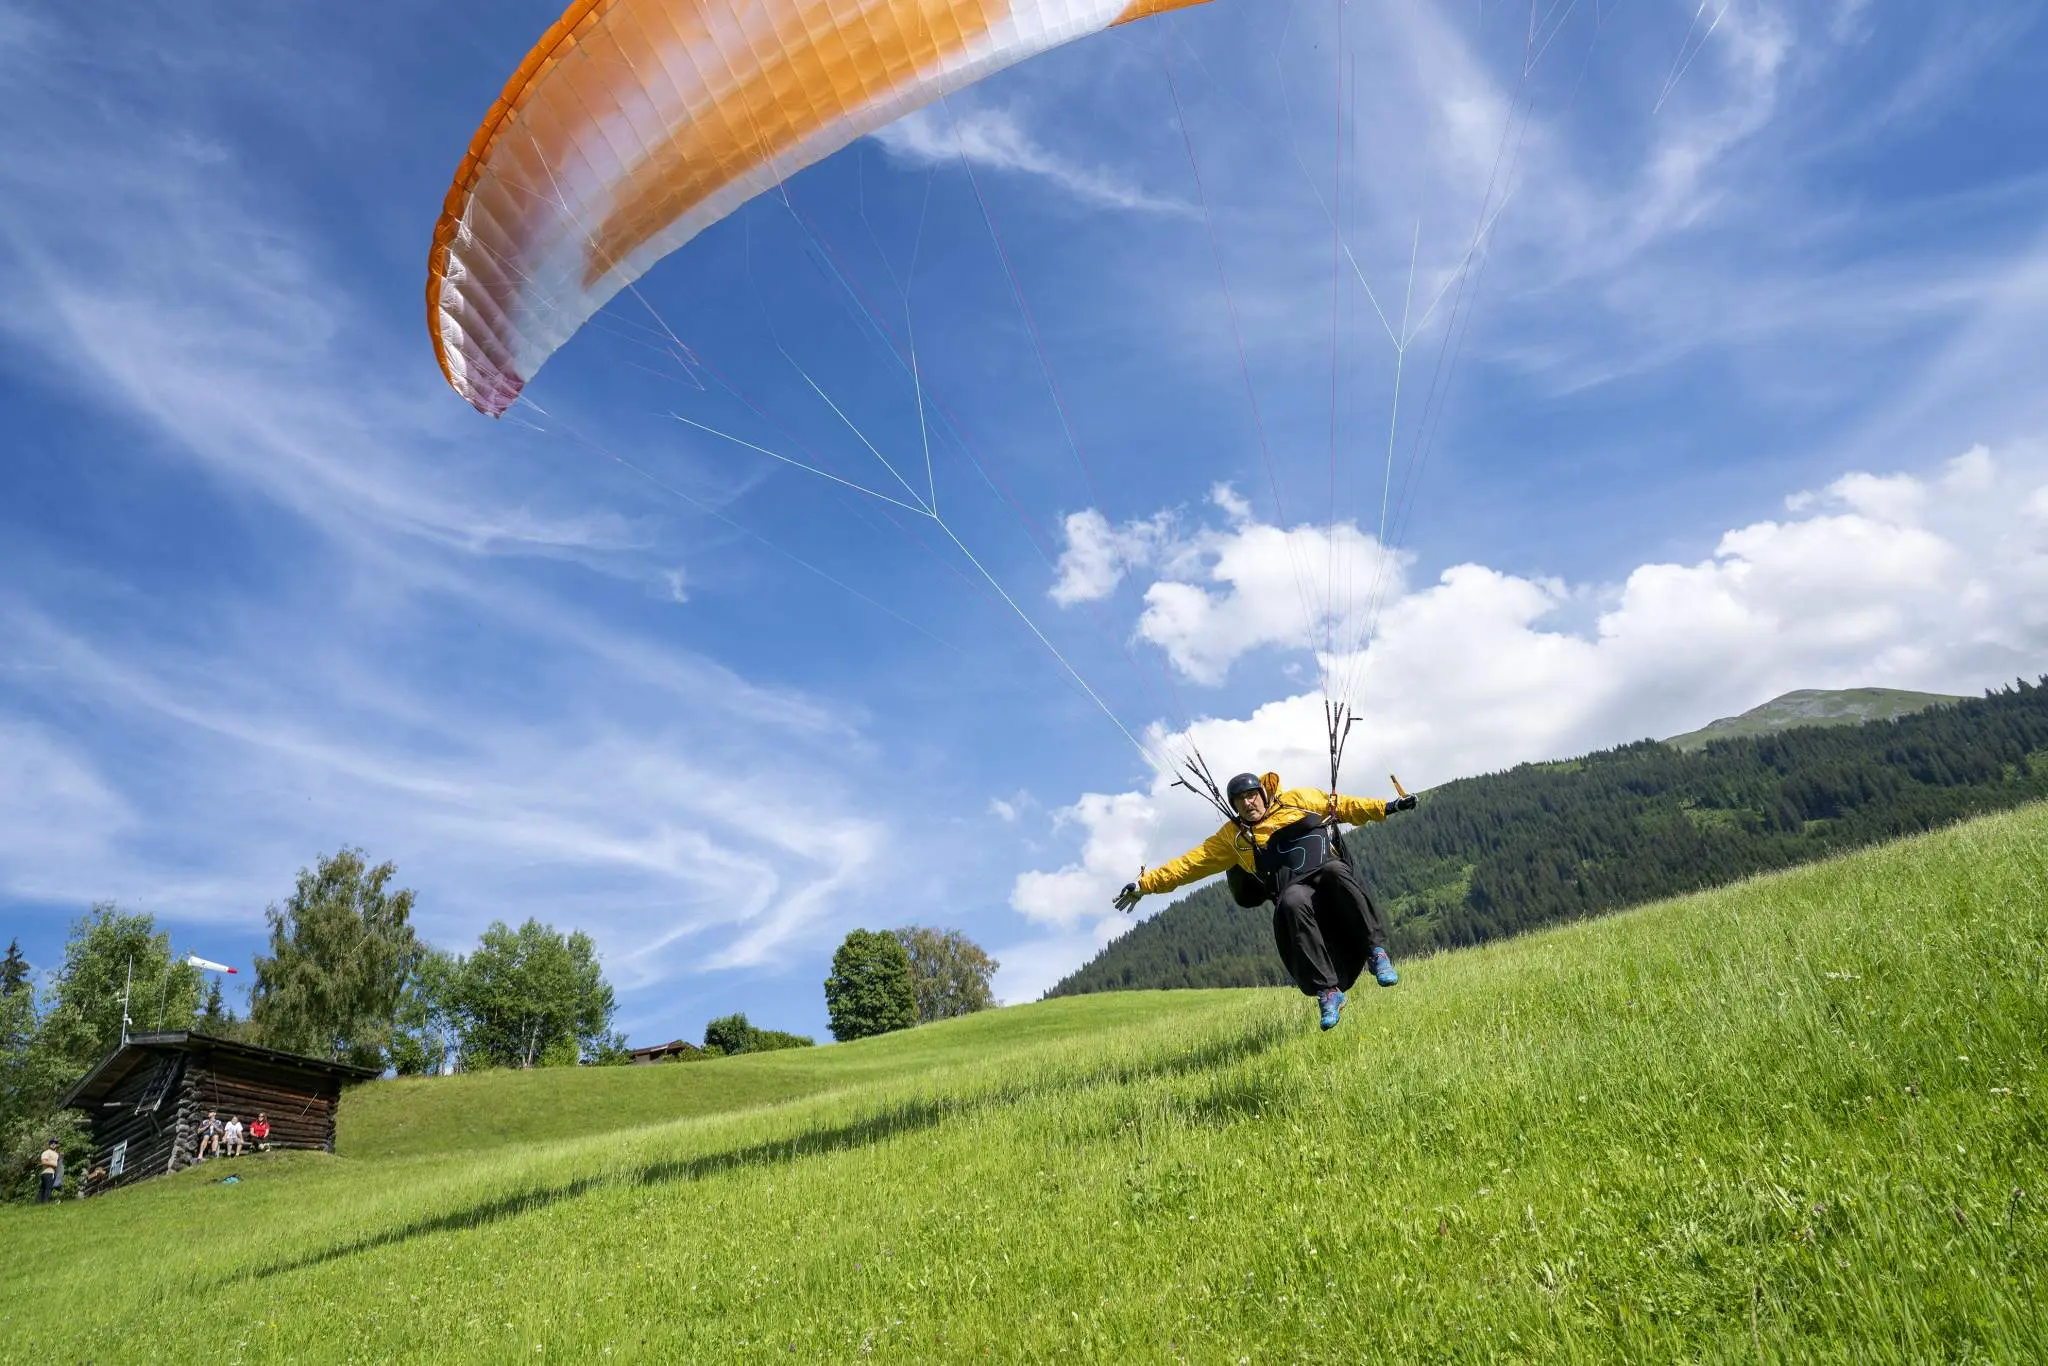 Flight school Pinzgau - Paragliding A-certificate complete course. Learn paragliding in the most beautiful flying areas in Pinzgau.